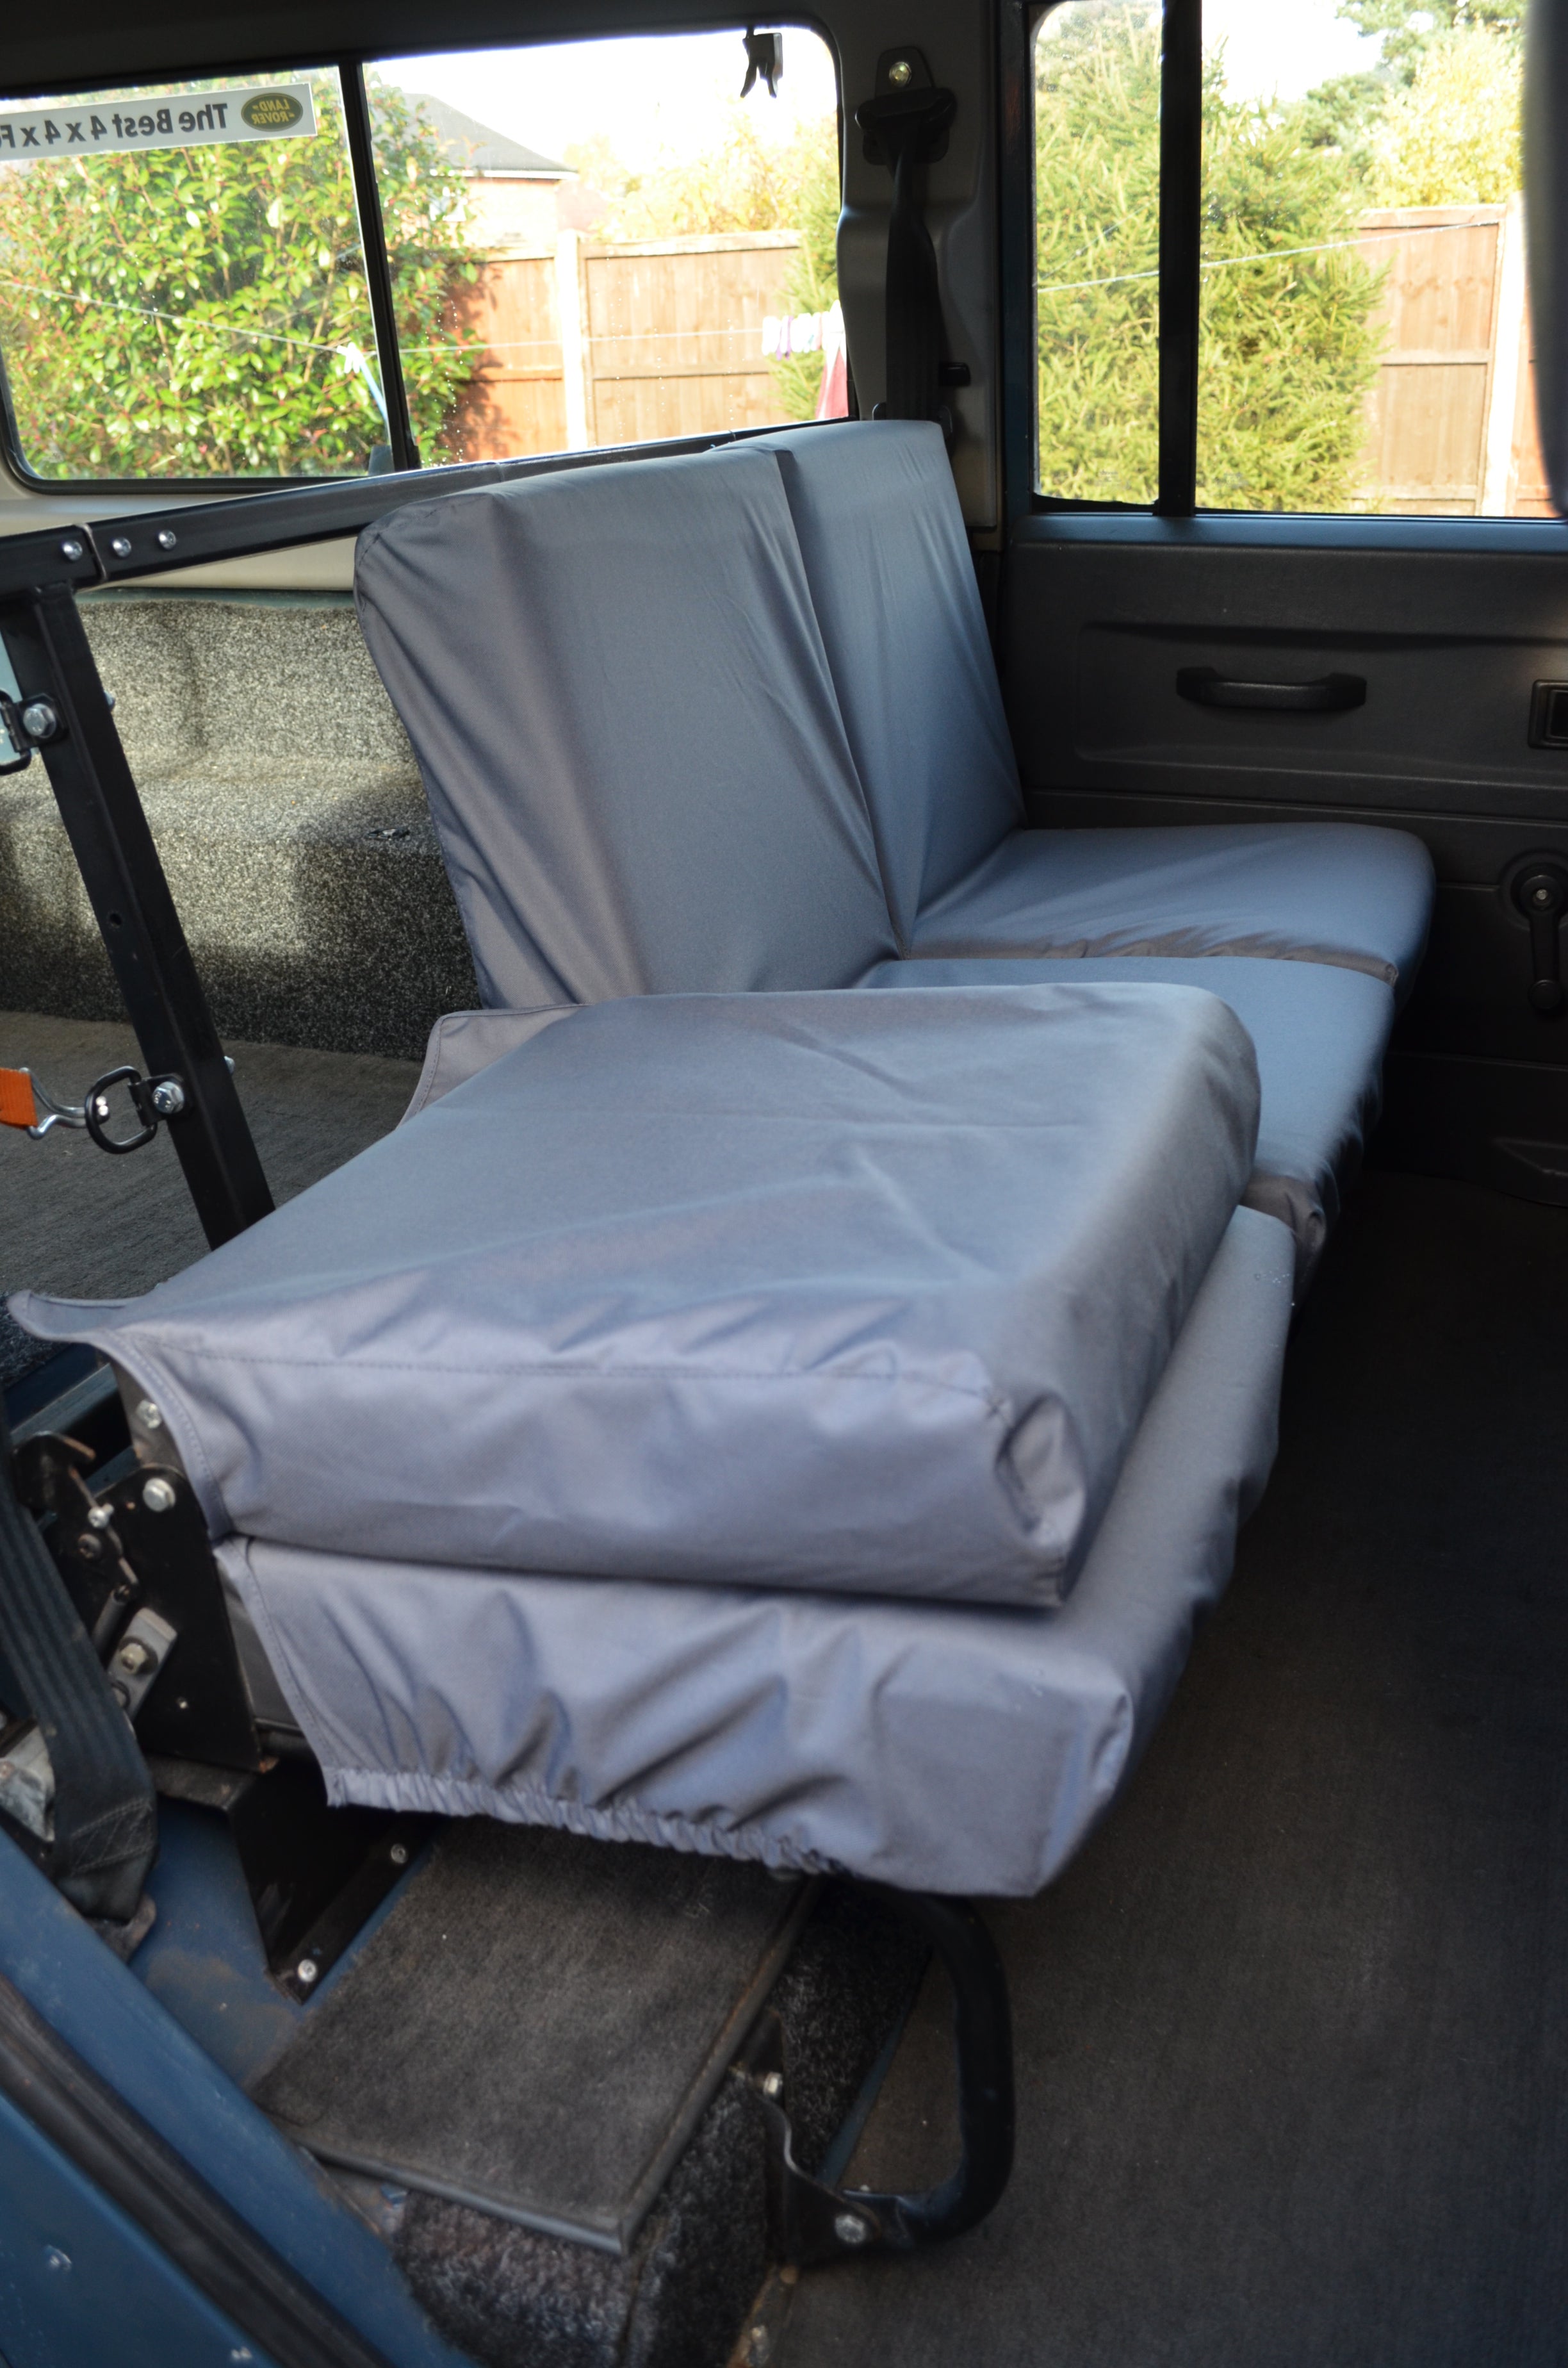 Land Rover Defender 1983 - 2007 Rear Seat Covers  Turtle Covers Ltd